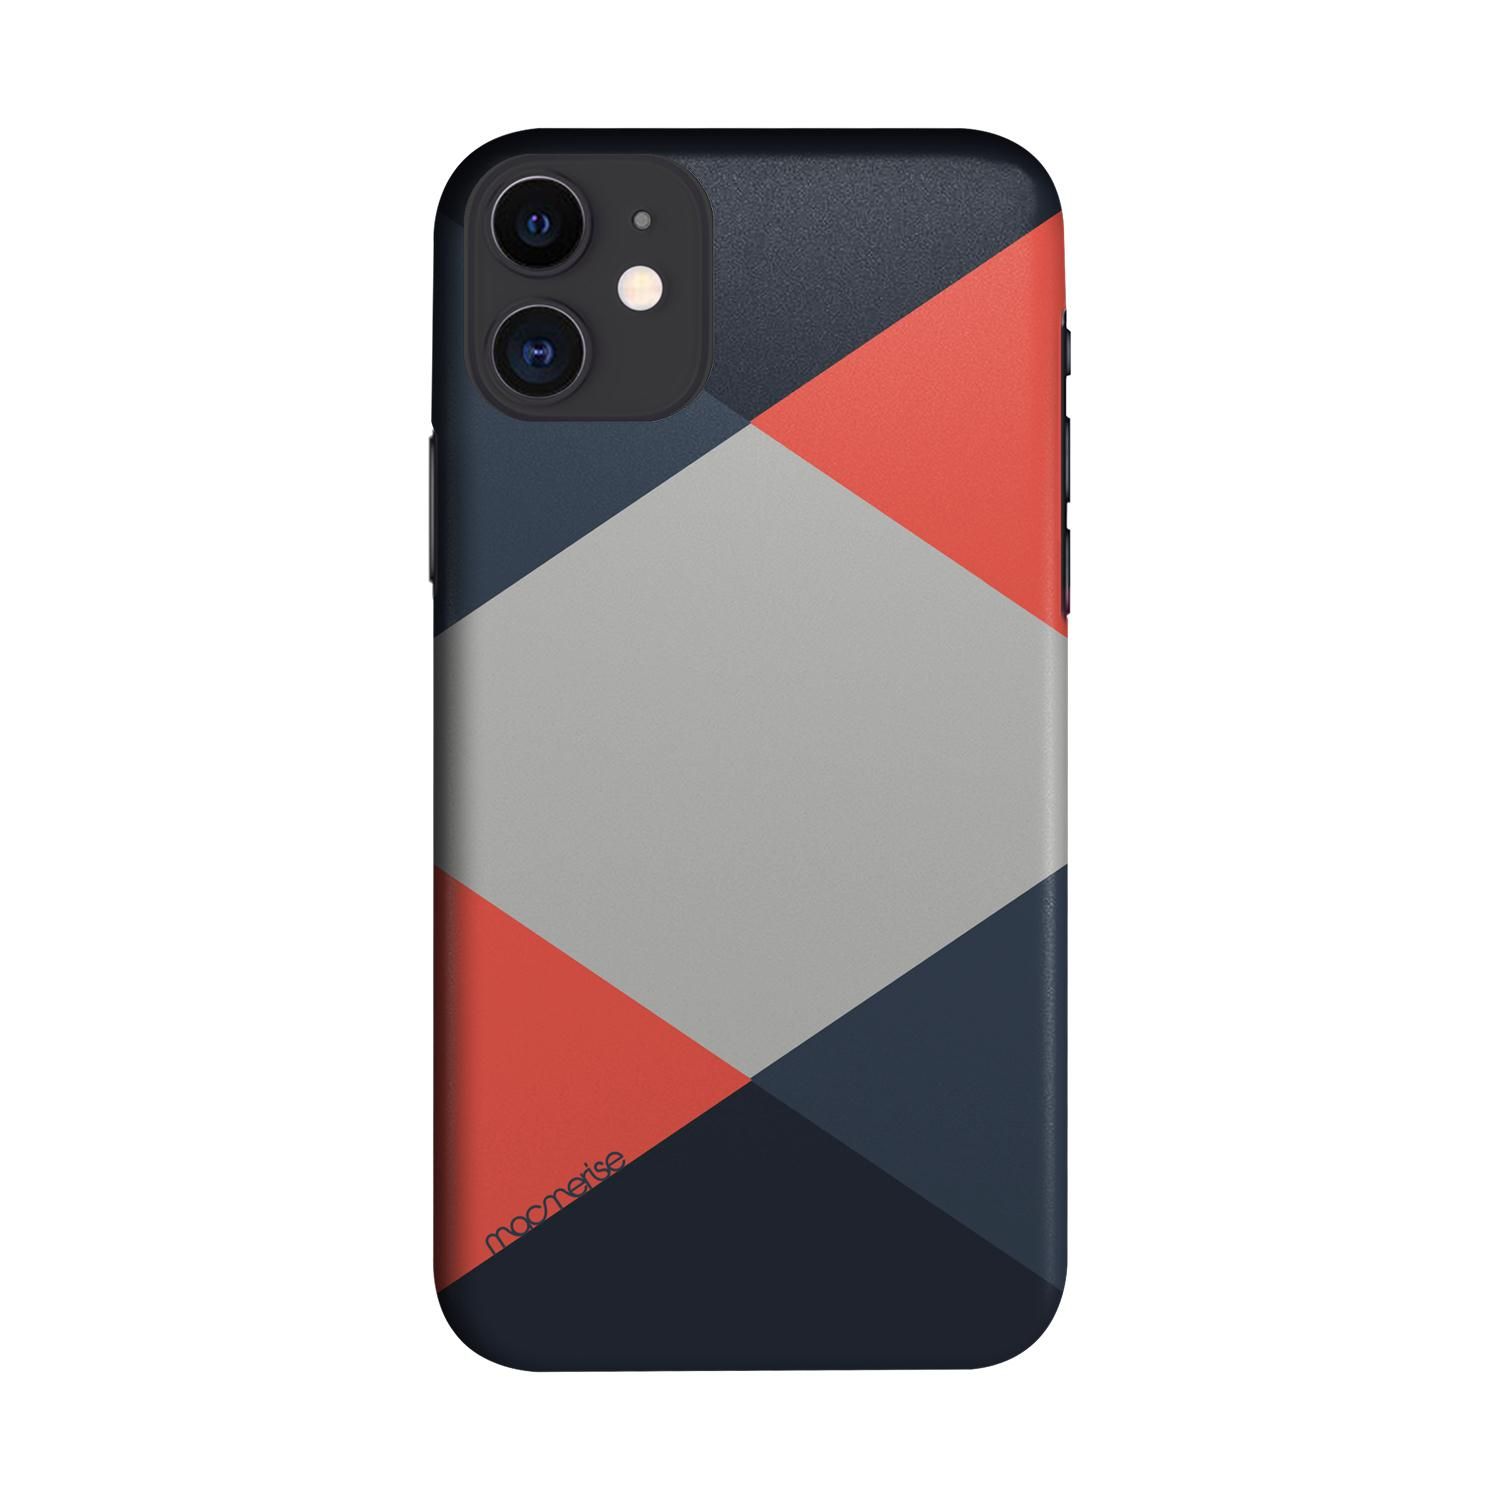 Buy Criss Cross Coral - Sleek Phone Case for iPhone 11 Online